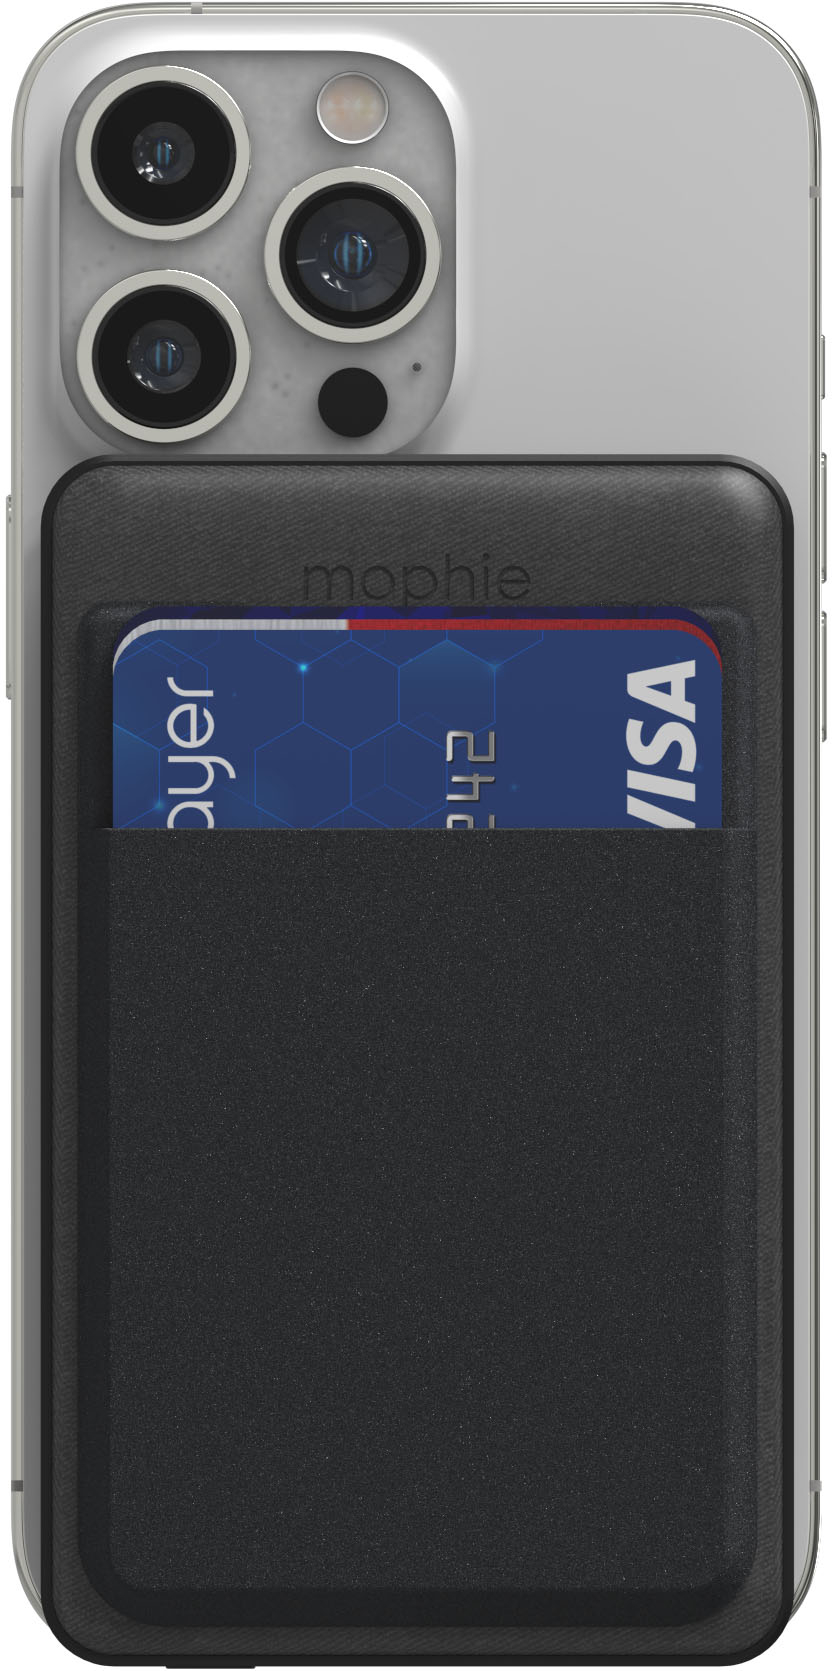  mophie - Snap+ Juice Pack Mini Wallet 5,000 mAh Portable Charger &amp; Card Holder with MagSafe Compatibility - Black